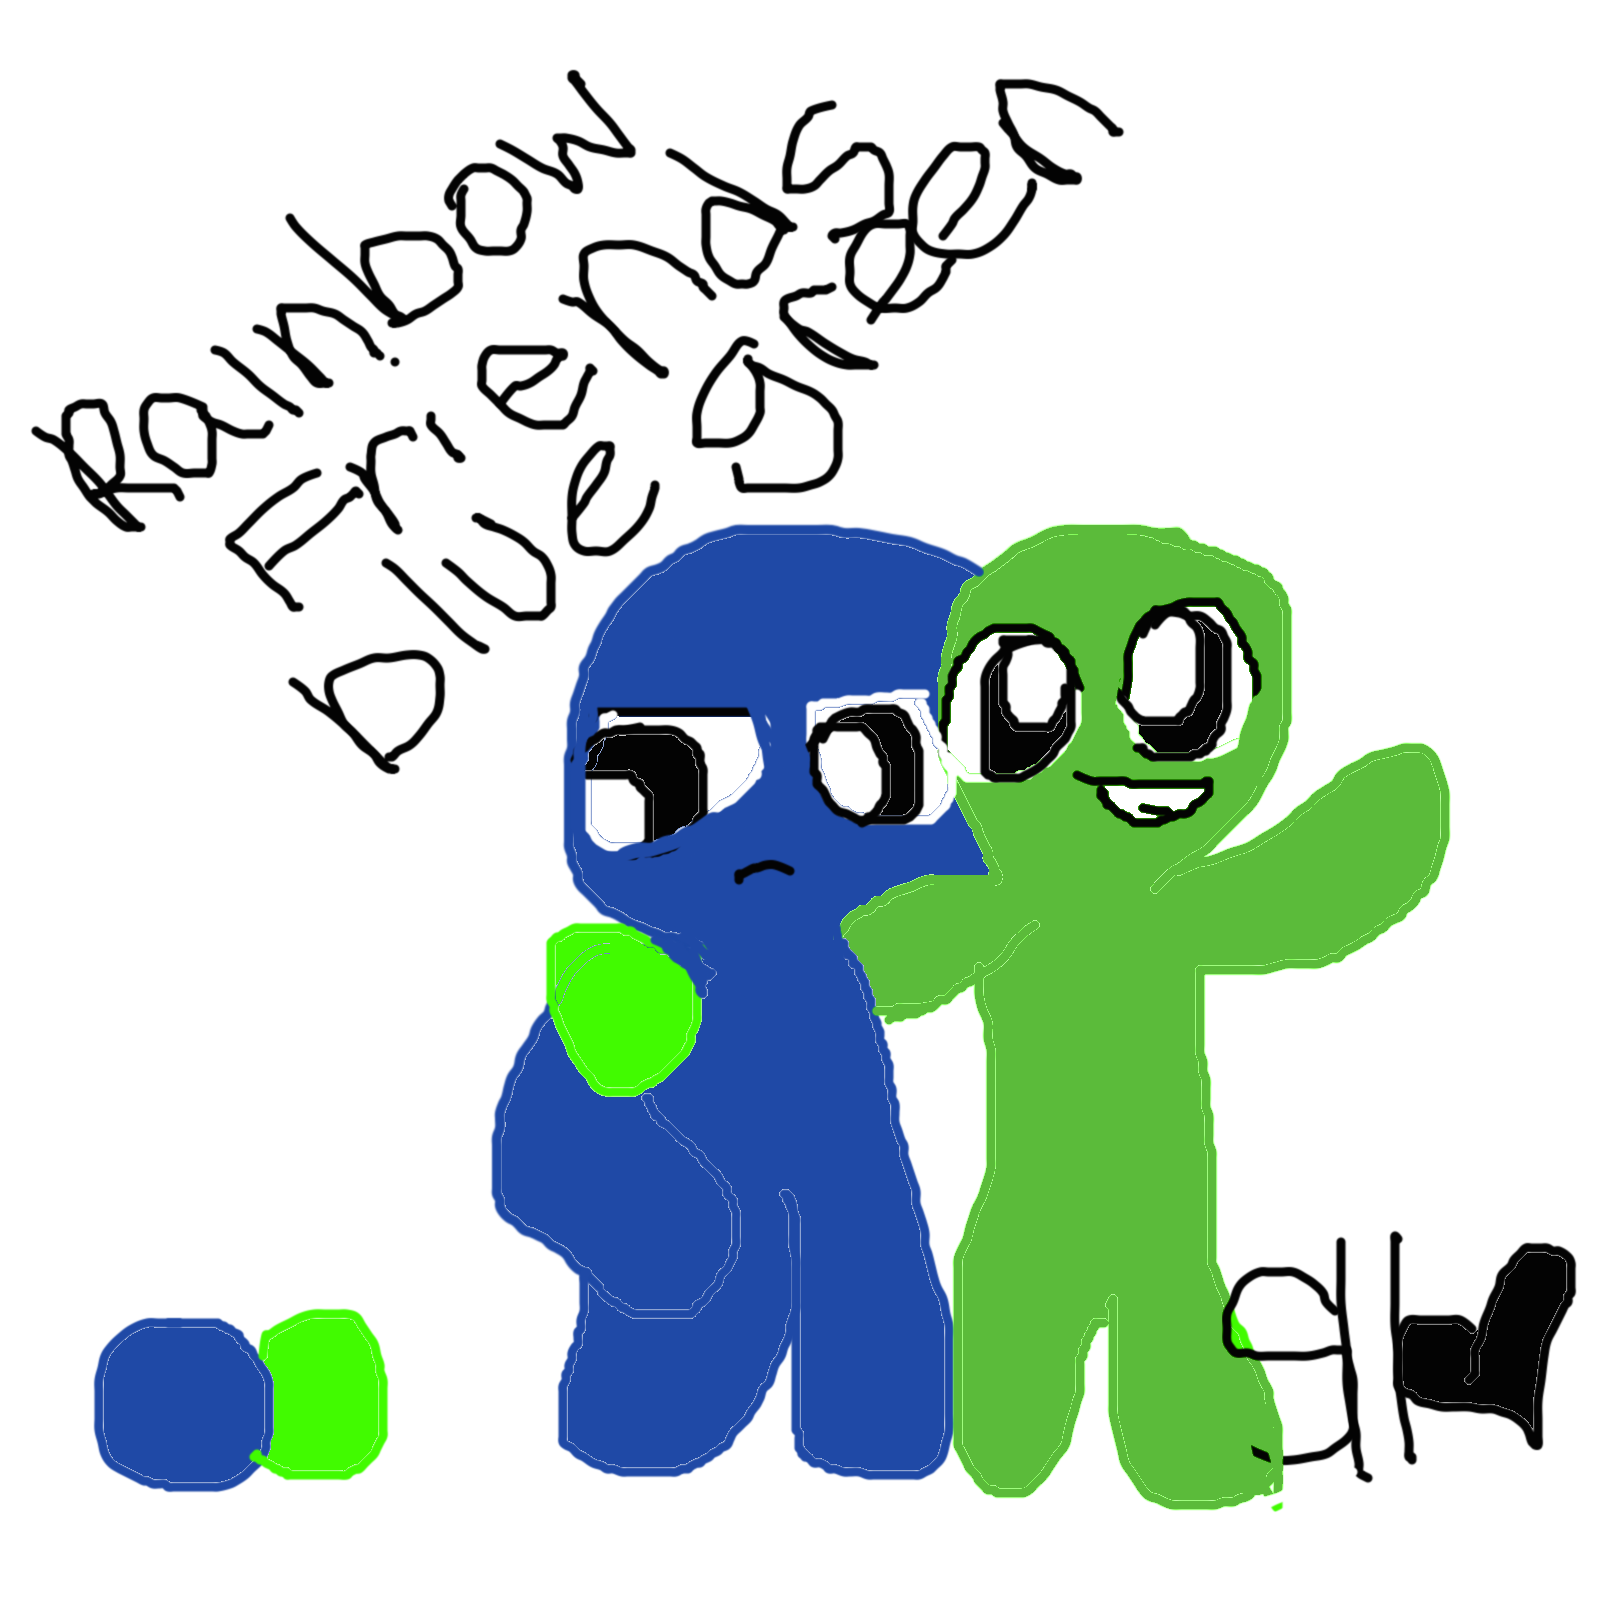 Rainbow friend foe Blue and green by Stacey-11 on DeviantArt